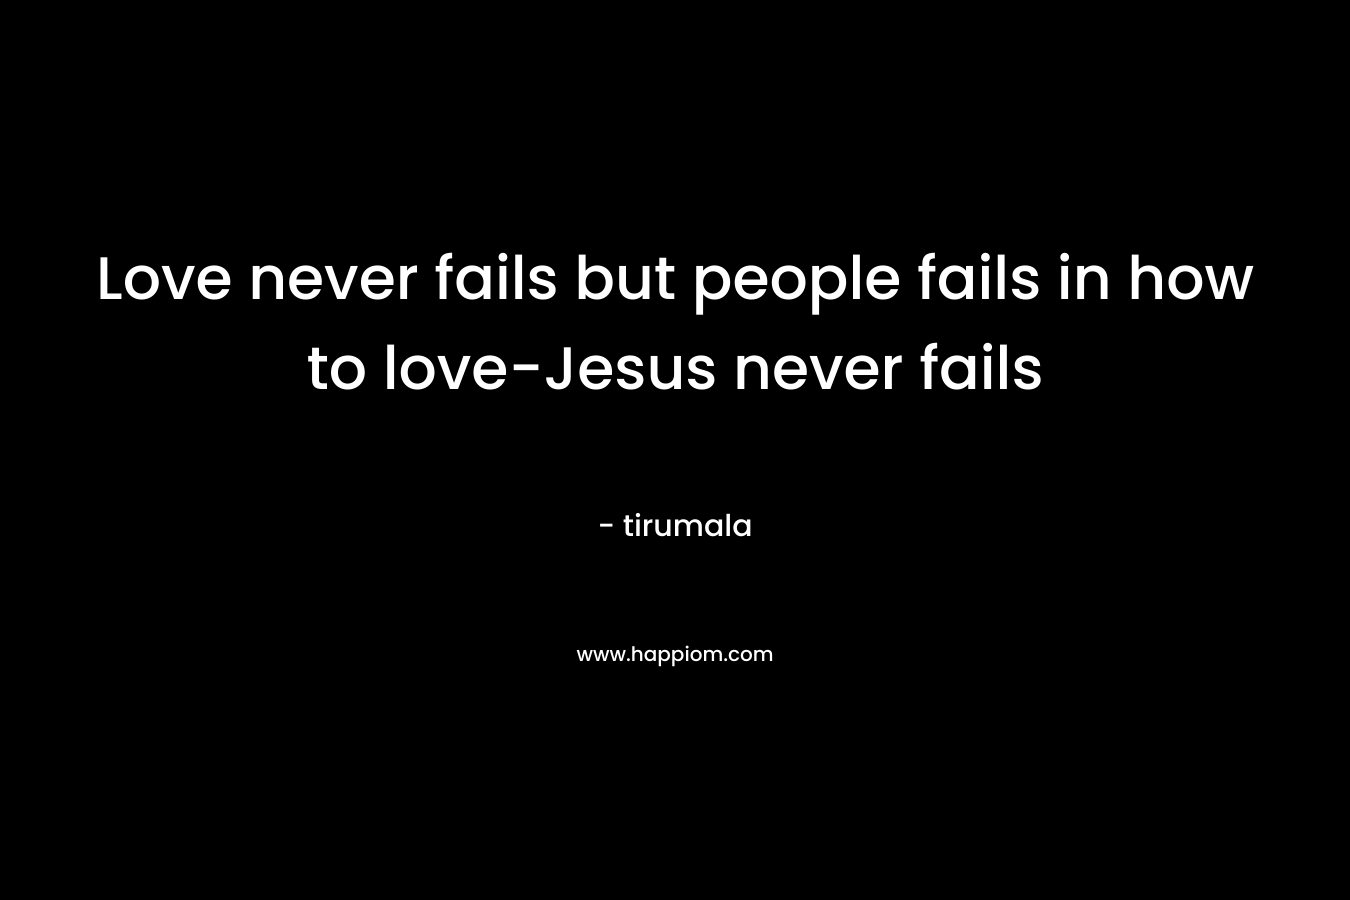 Love never fails but people fails in how to love-Jesus never fails – tirumala